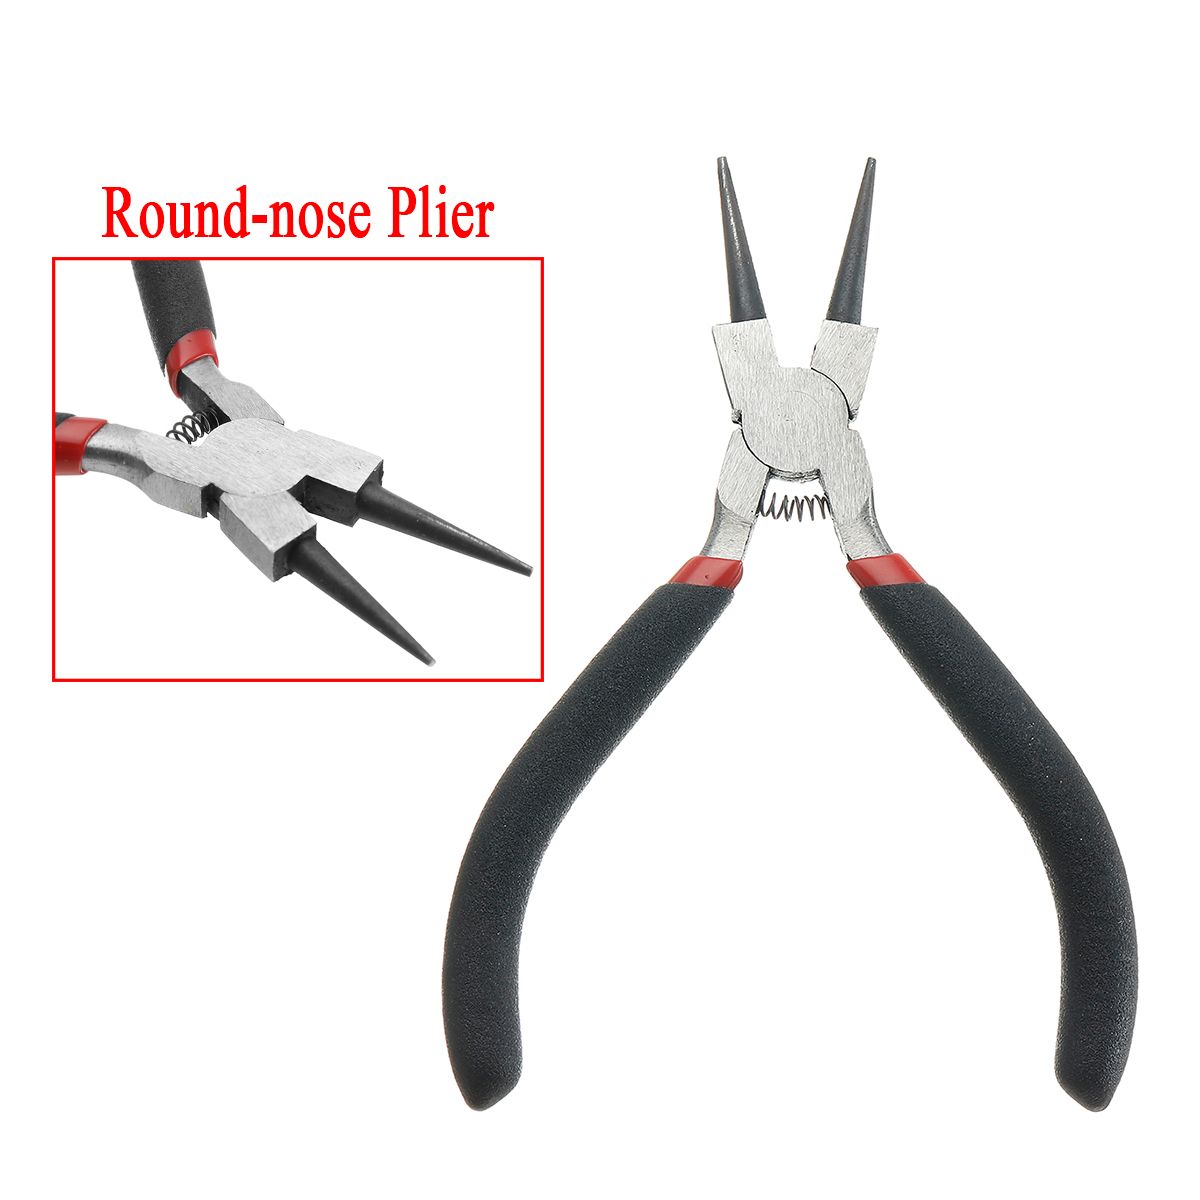 Jewelry-Beading-Making-Mini-Pliers-Wire-Bending-Beads-Pliers-Craft-DIY-Hand-Tools-1441580